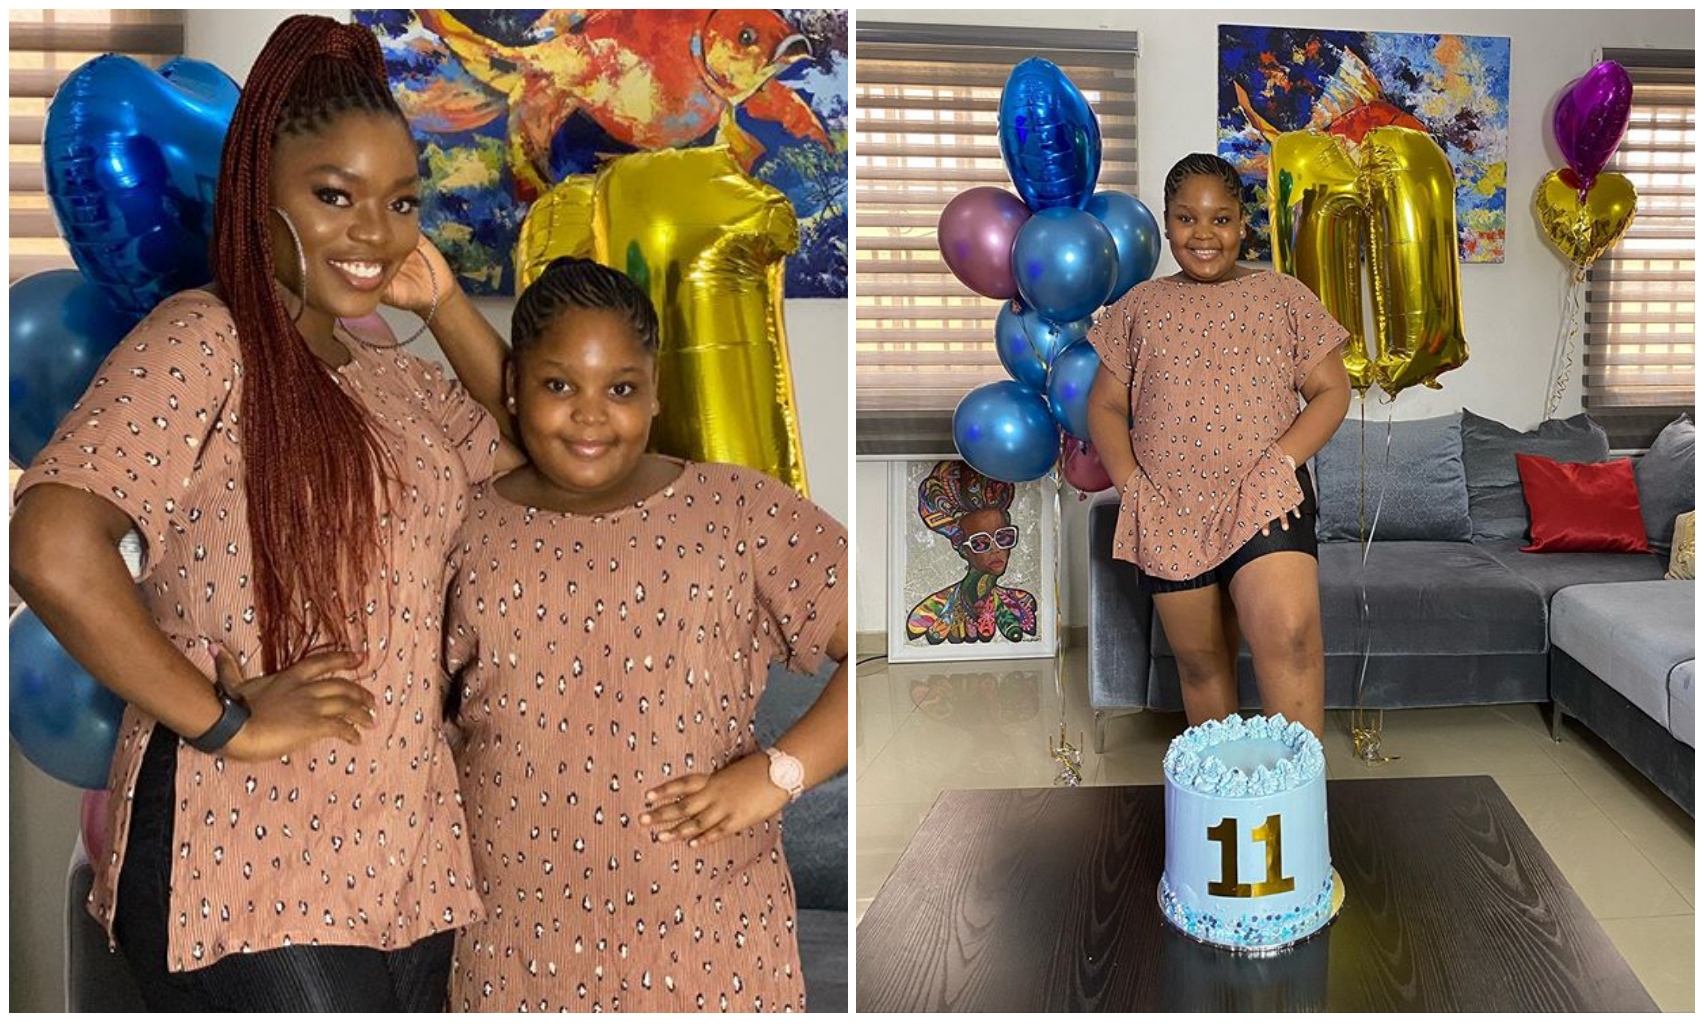 Actress Bisola pens heartfelt message to celebrate daughter's 11th birthday (Photos)